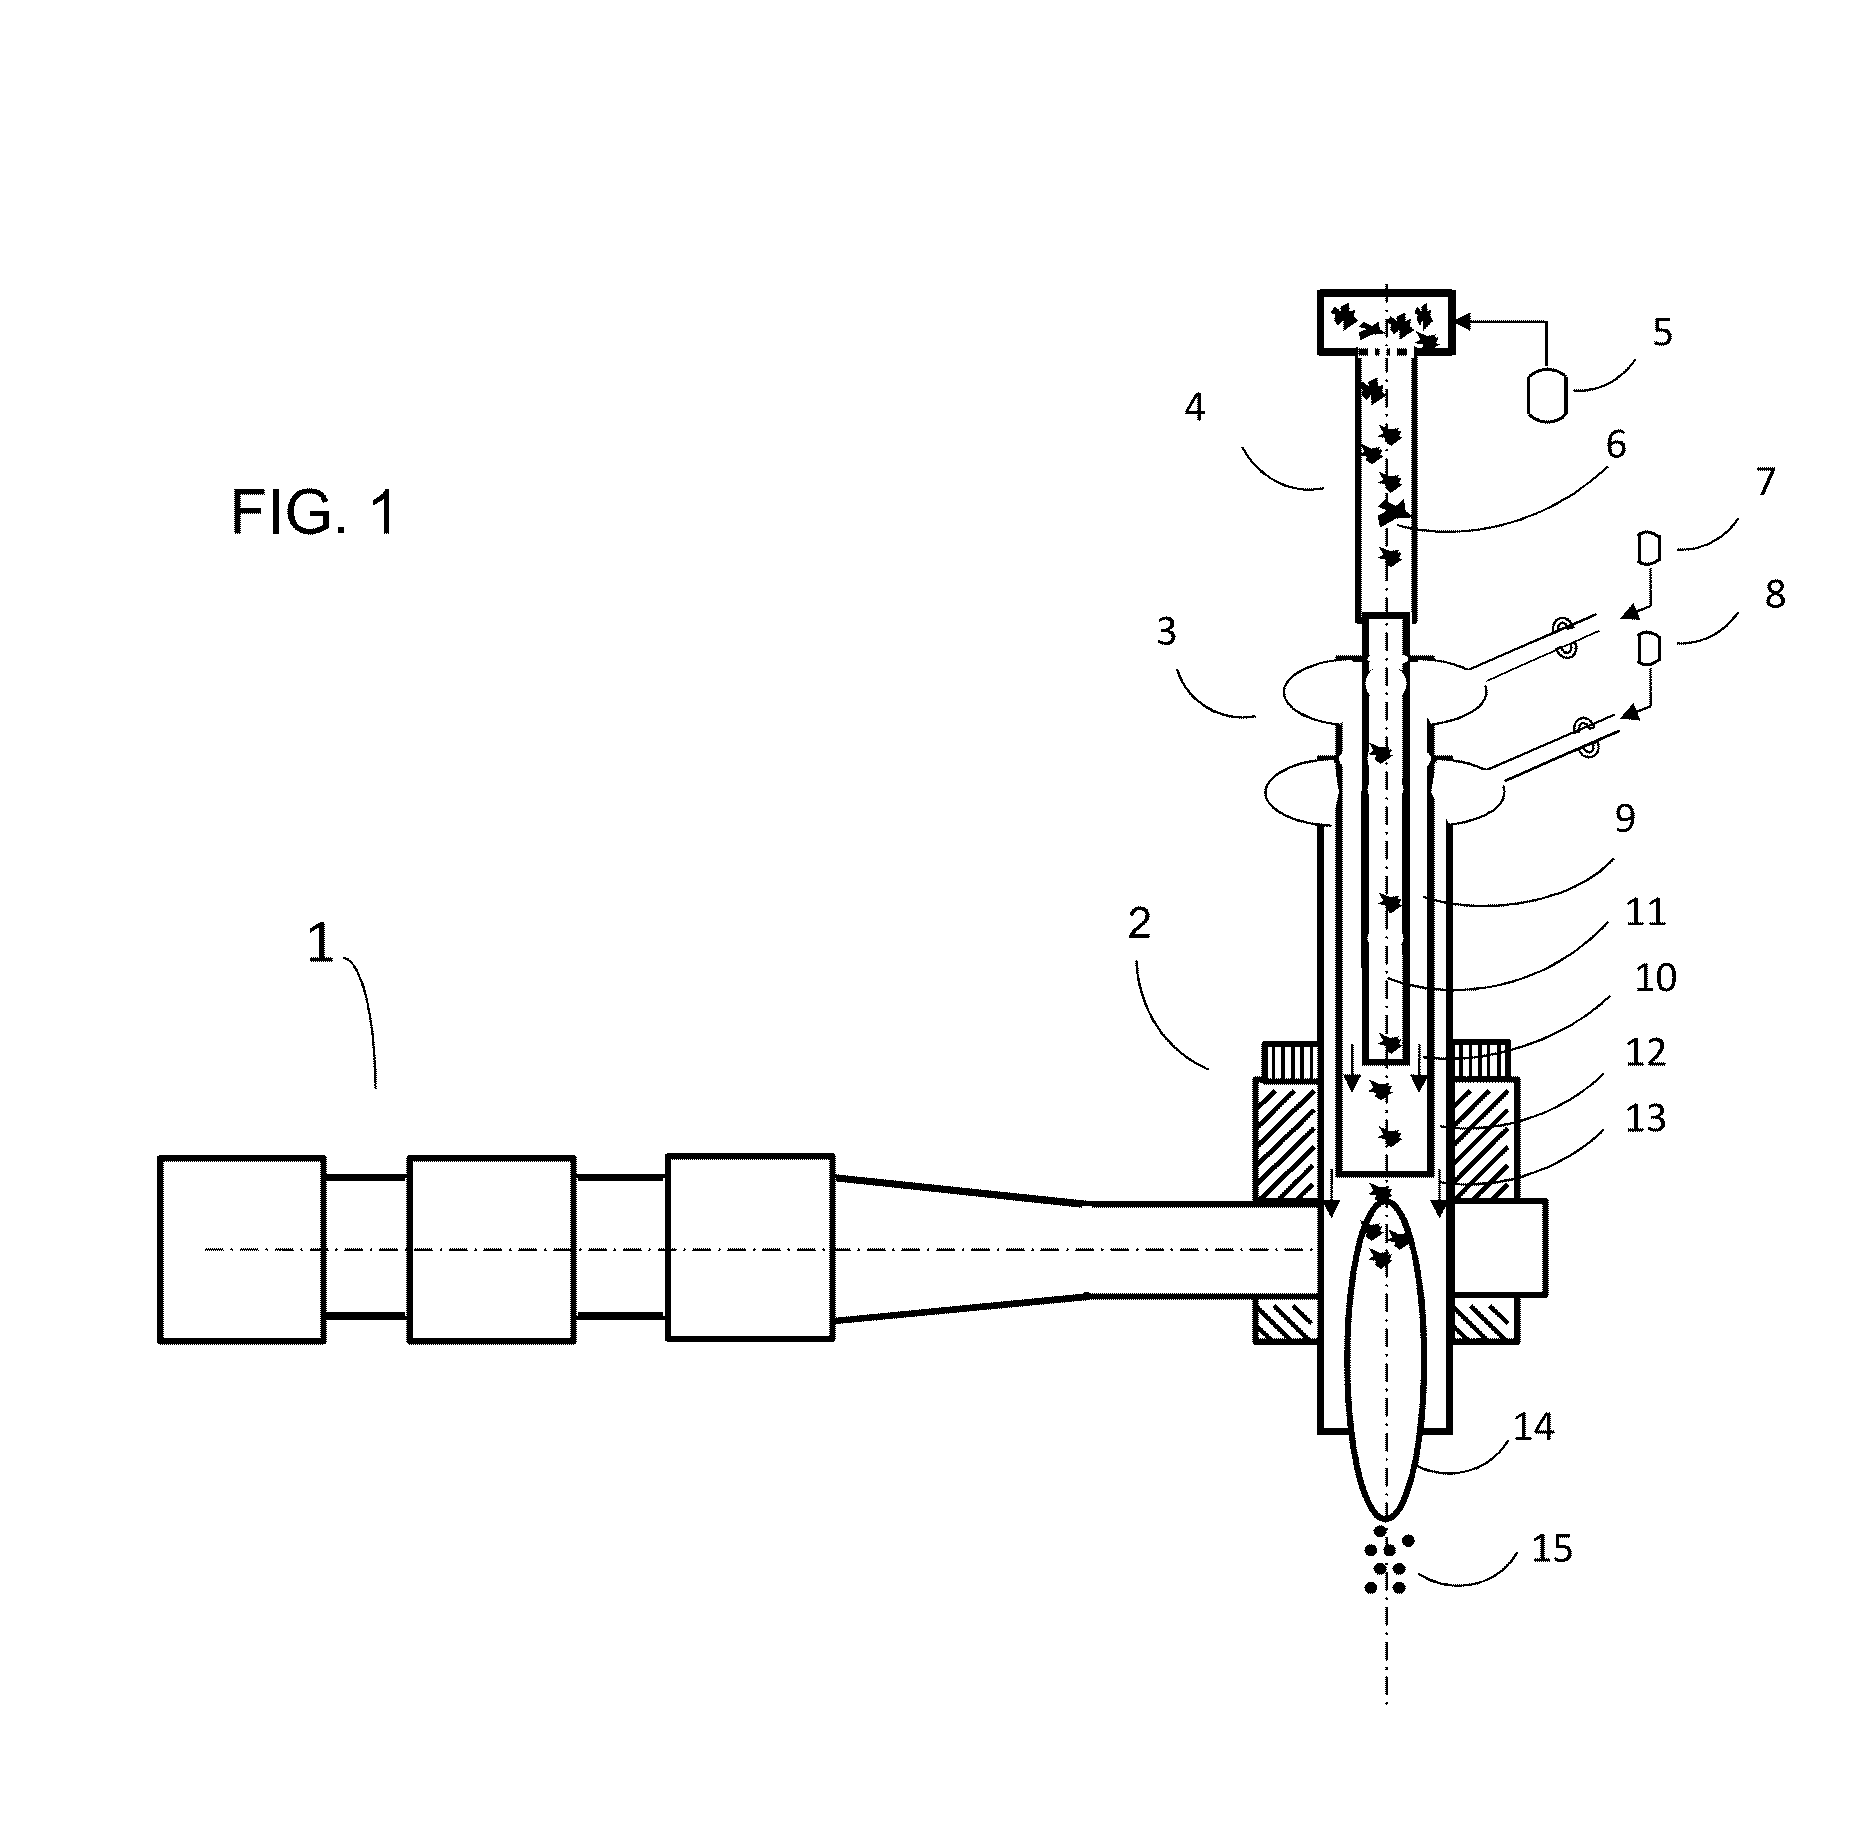 Method for the densification and spheroidization of solid and solution precursor droplets of materials using microwave generated plasma processing